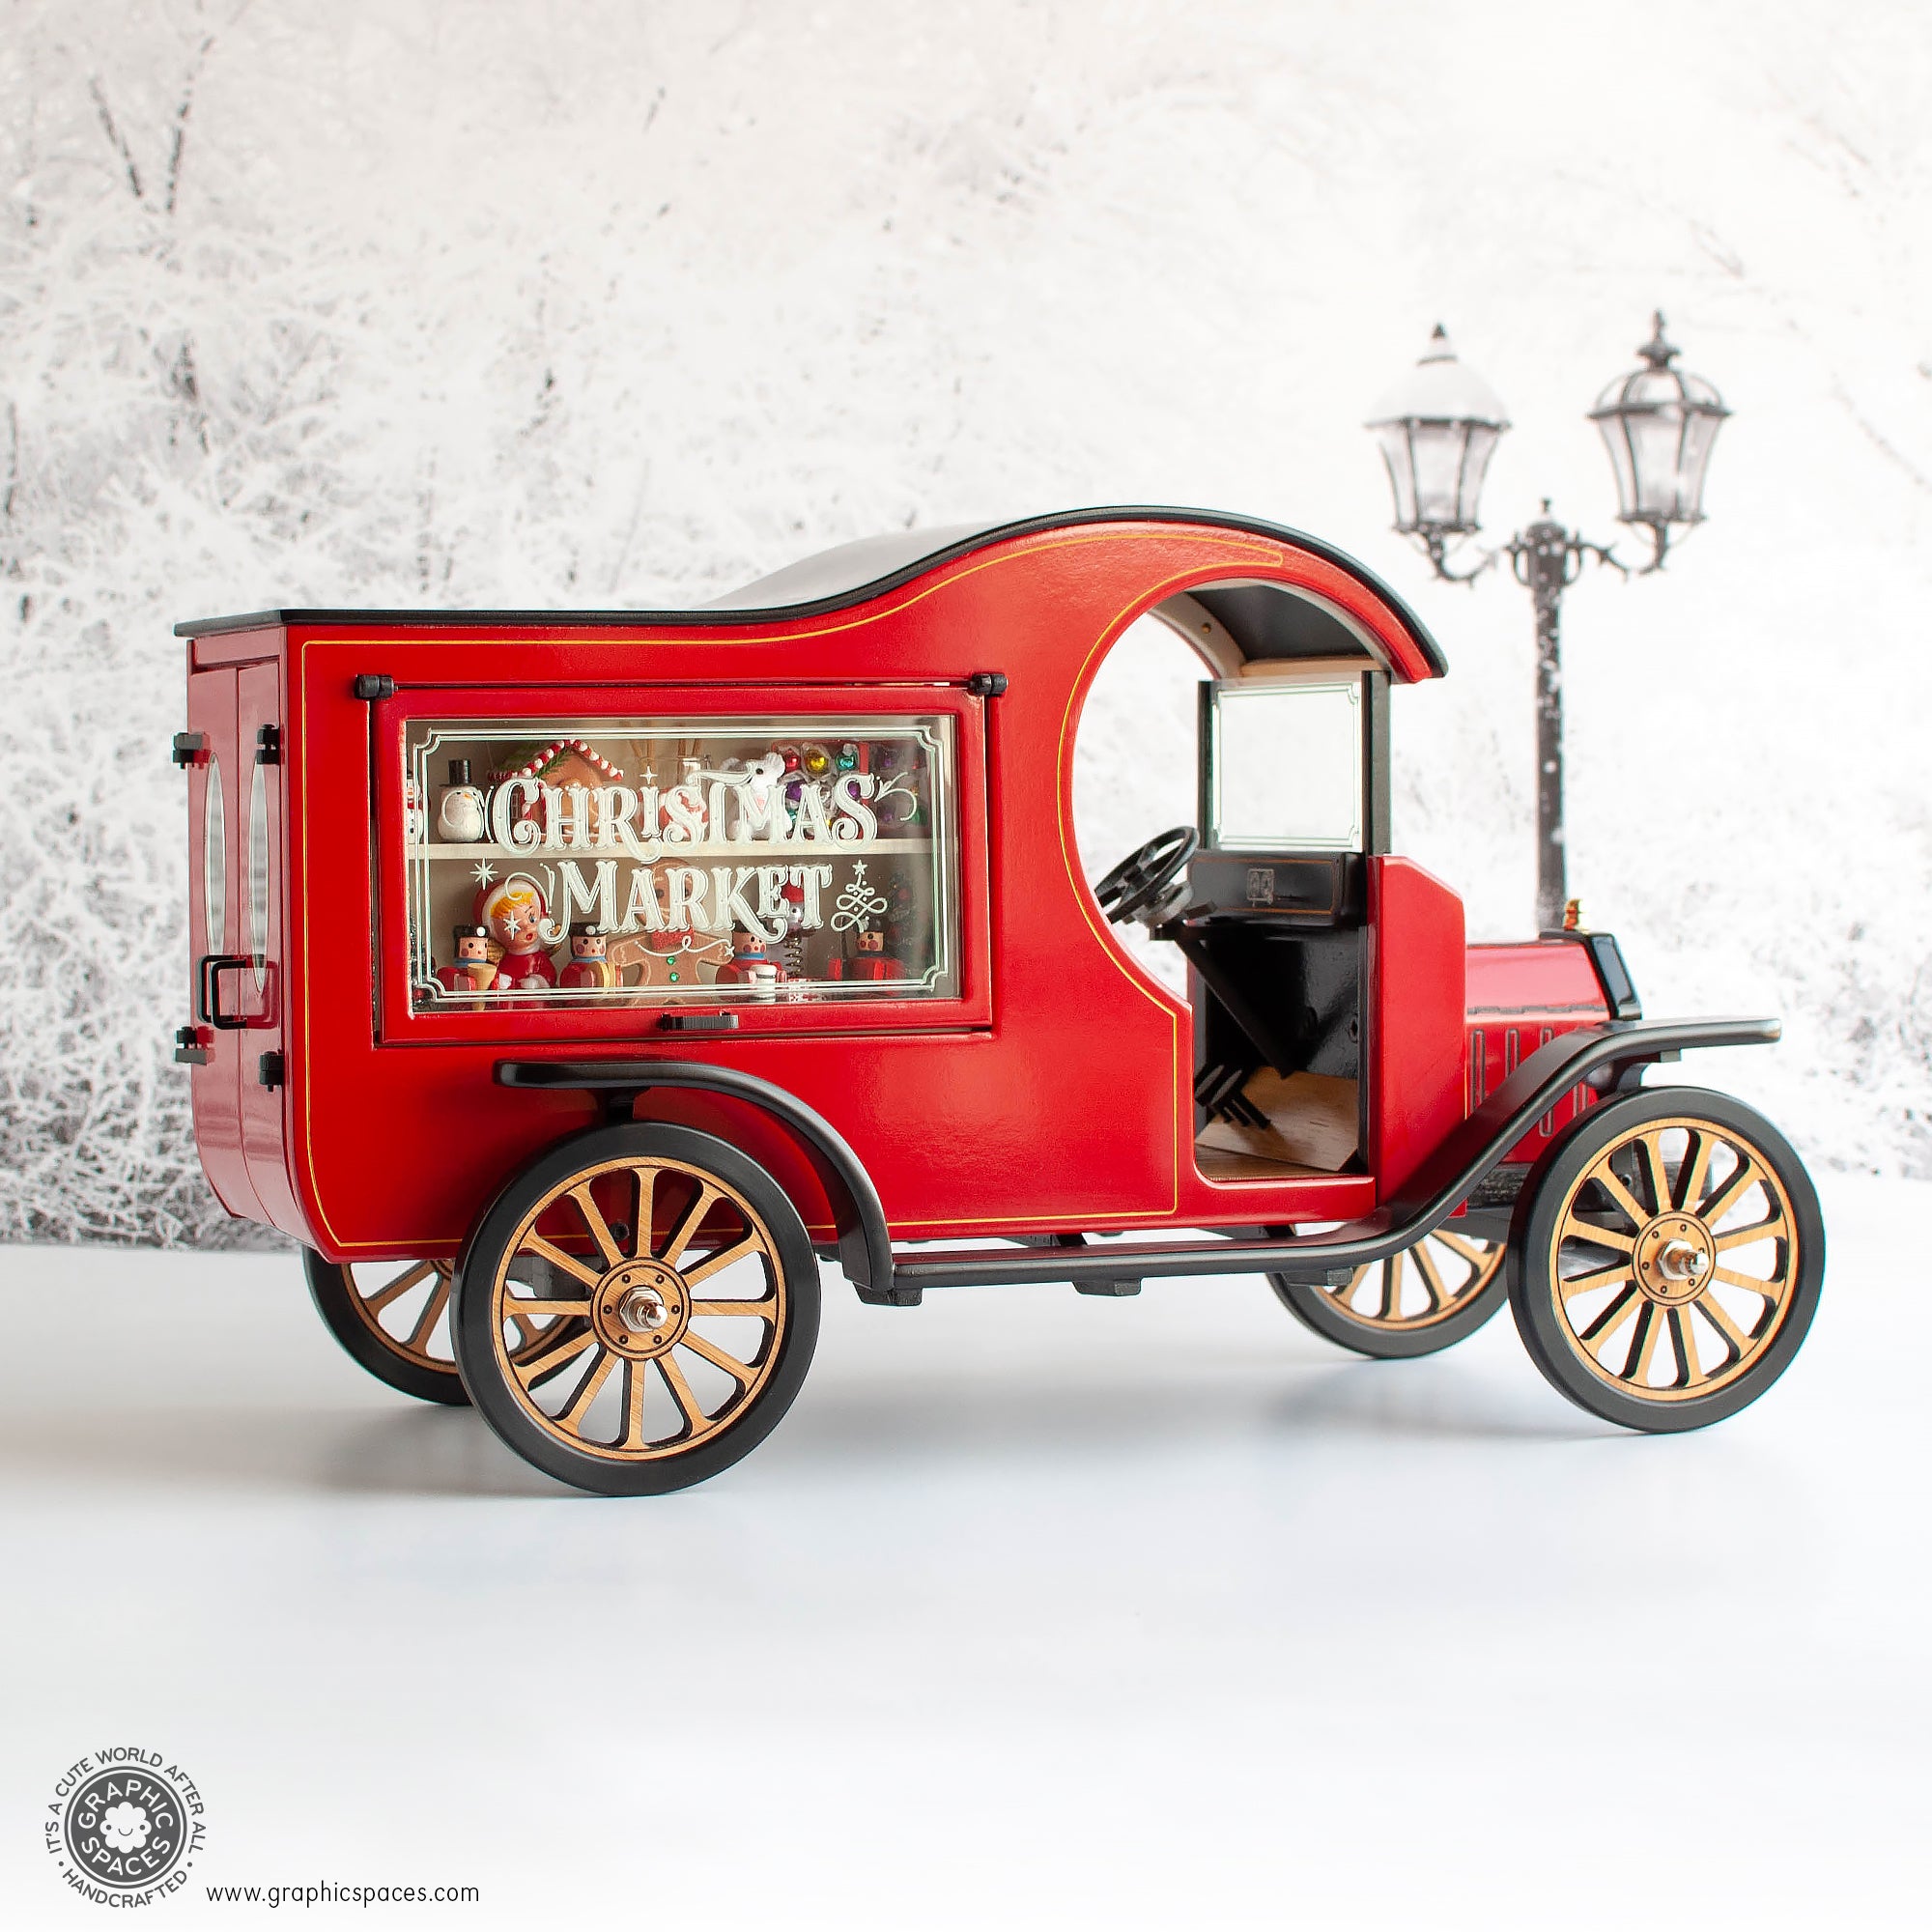 1:12 Scale Room Box Red Christmas Market Truck Model T C Cab. Passenger full side view. Closed display window.